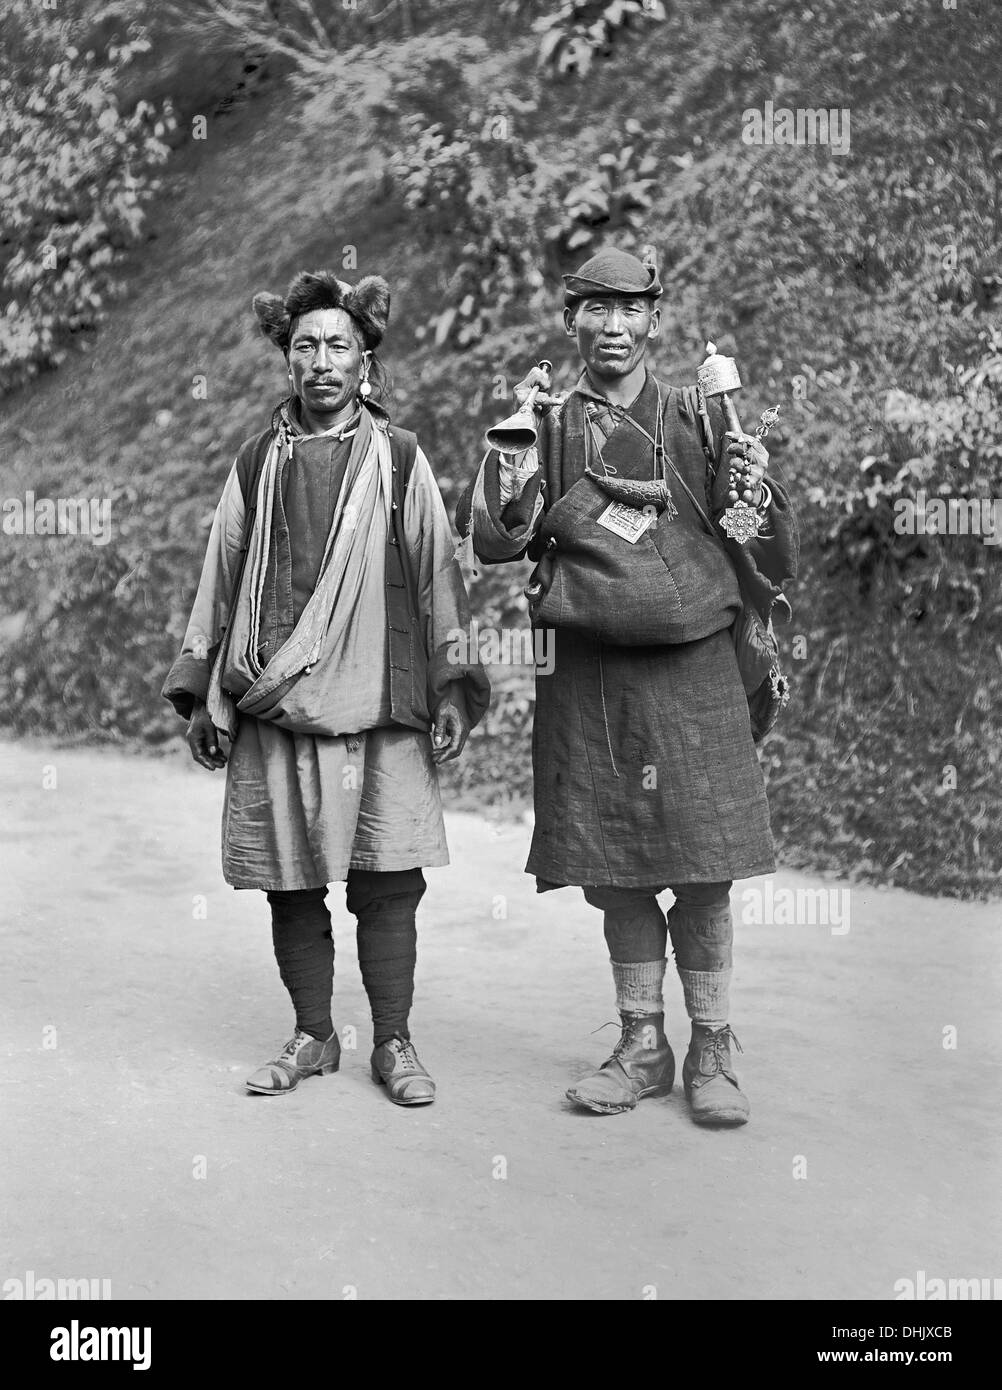 A Nepalese and a Tibetan are pictured in China, undated photograph (1911/1913). The image was taken by the German photographer Oswald Lübeck, one of the earliest representatives of travel photography and ship photography aboard passenger ships. Photo: Deutsche Fotothek/Oswald Lübeck Stock Photo